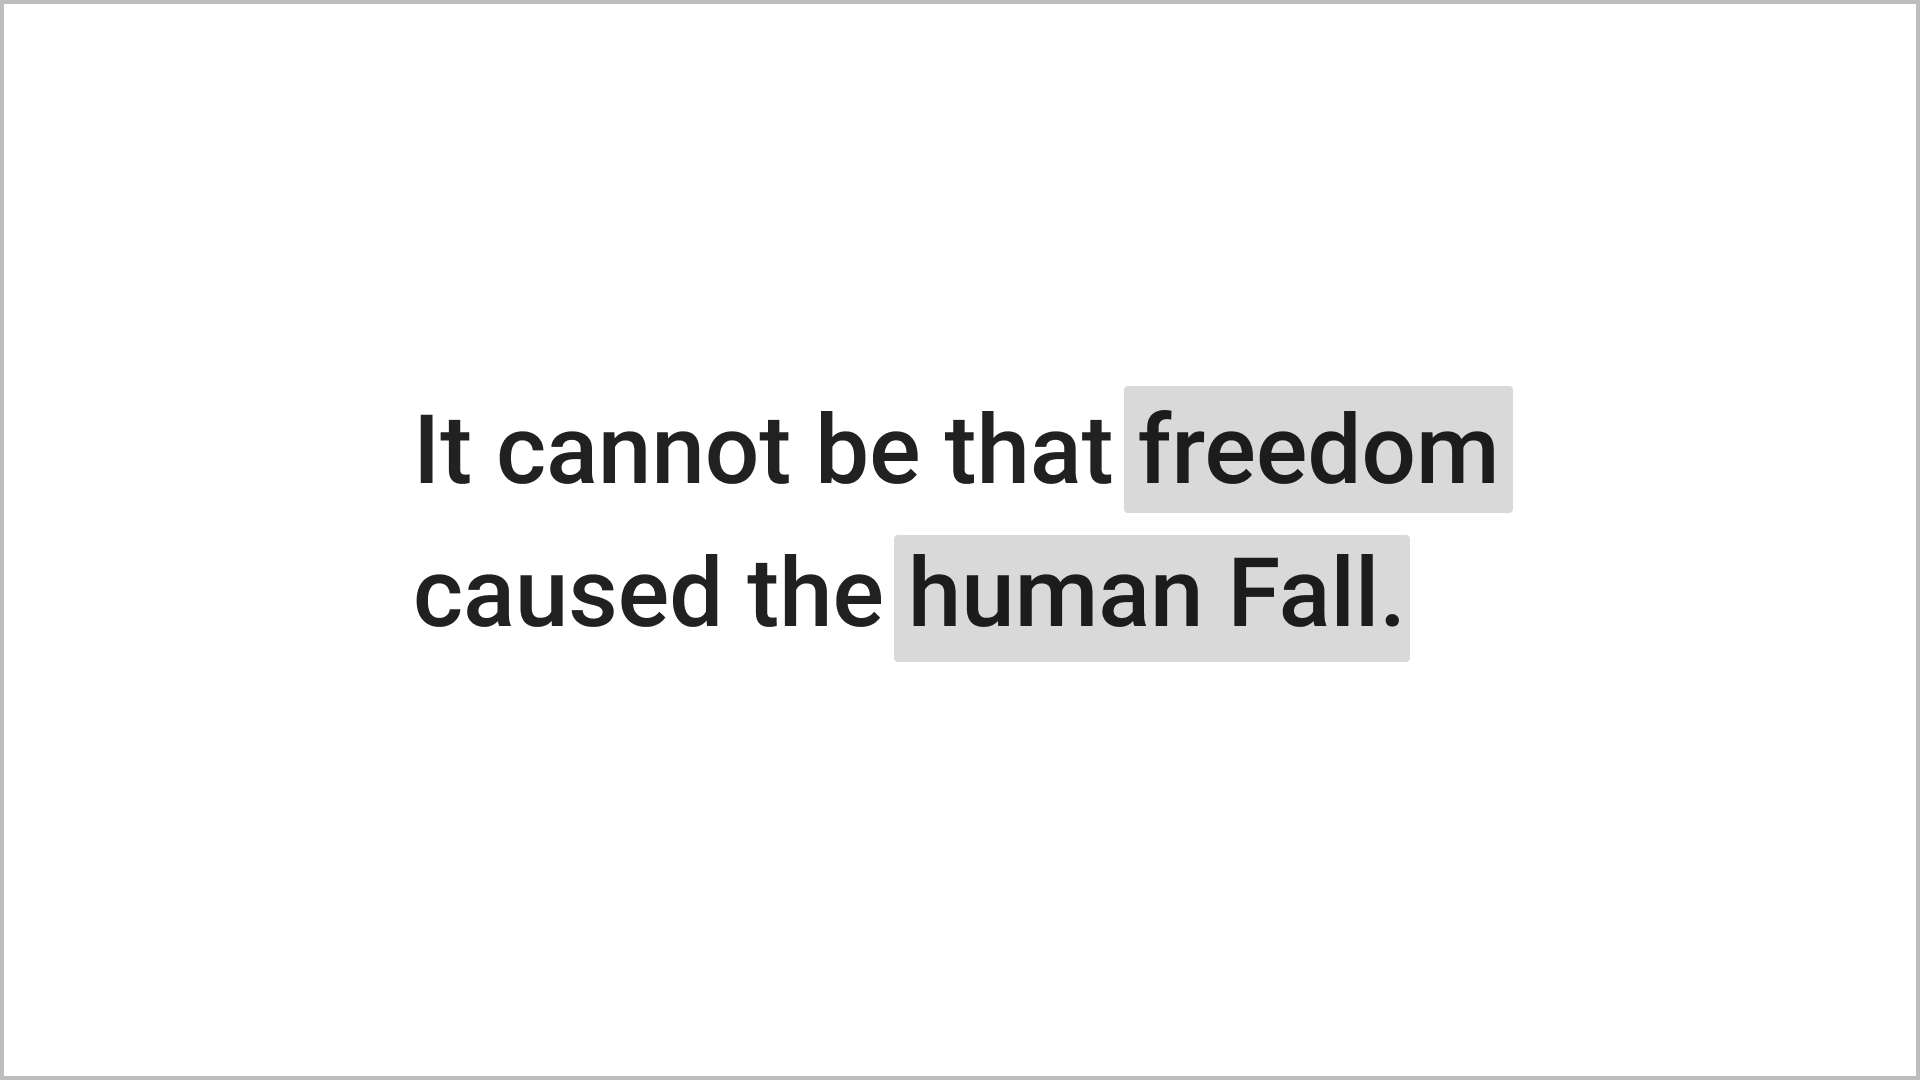 Freedom and the Human Fall